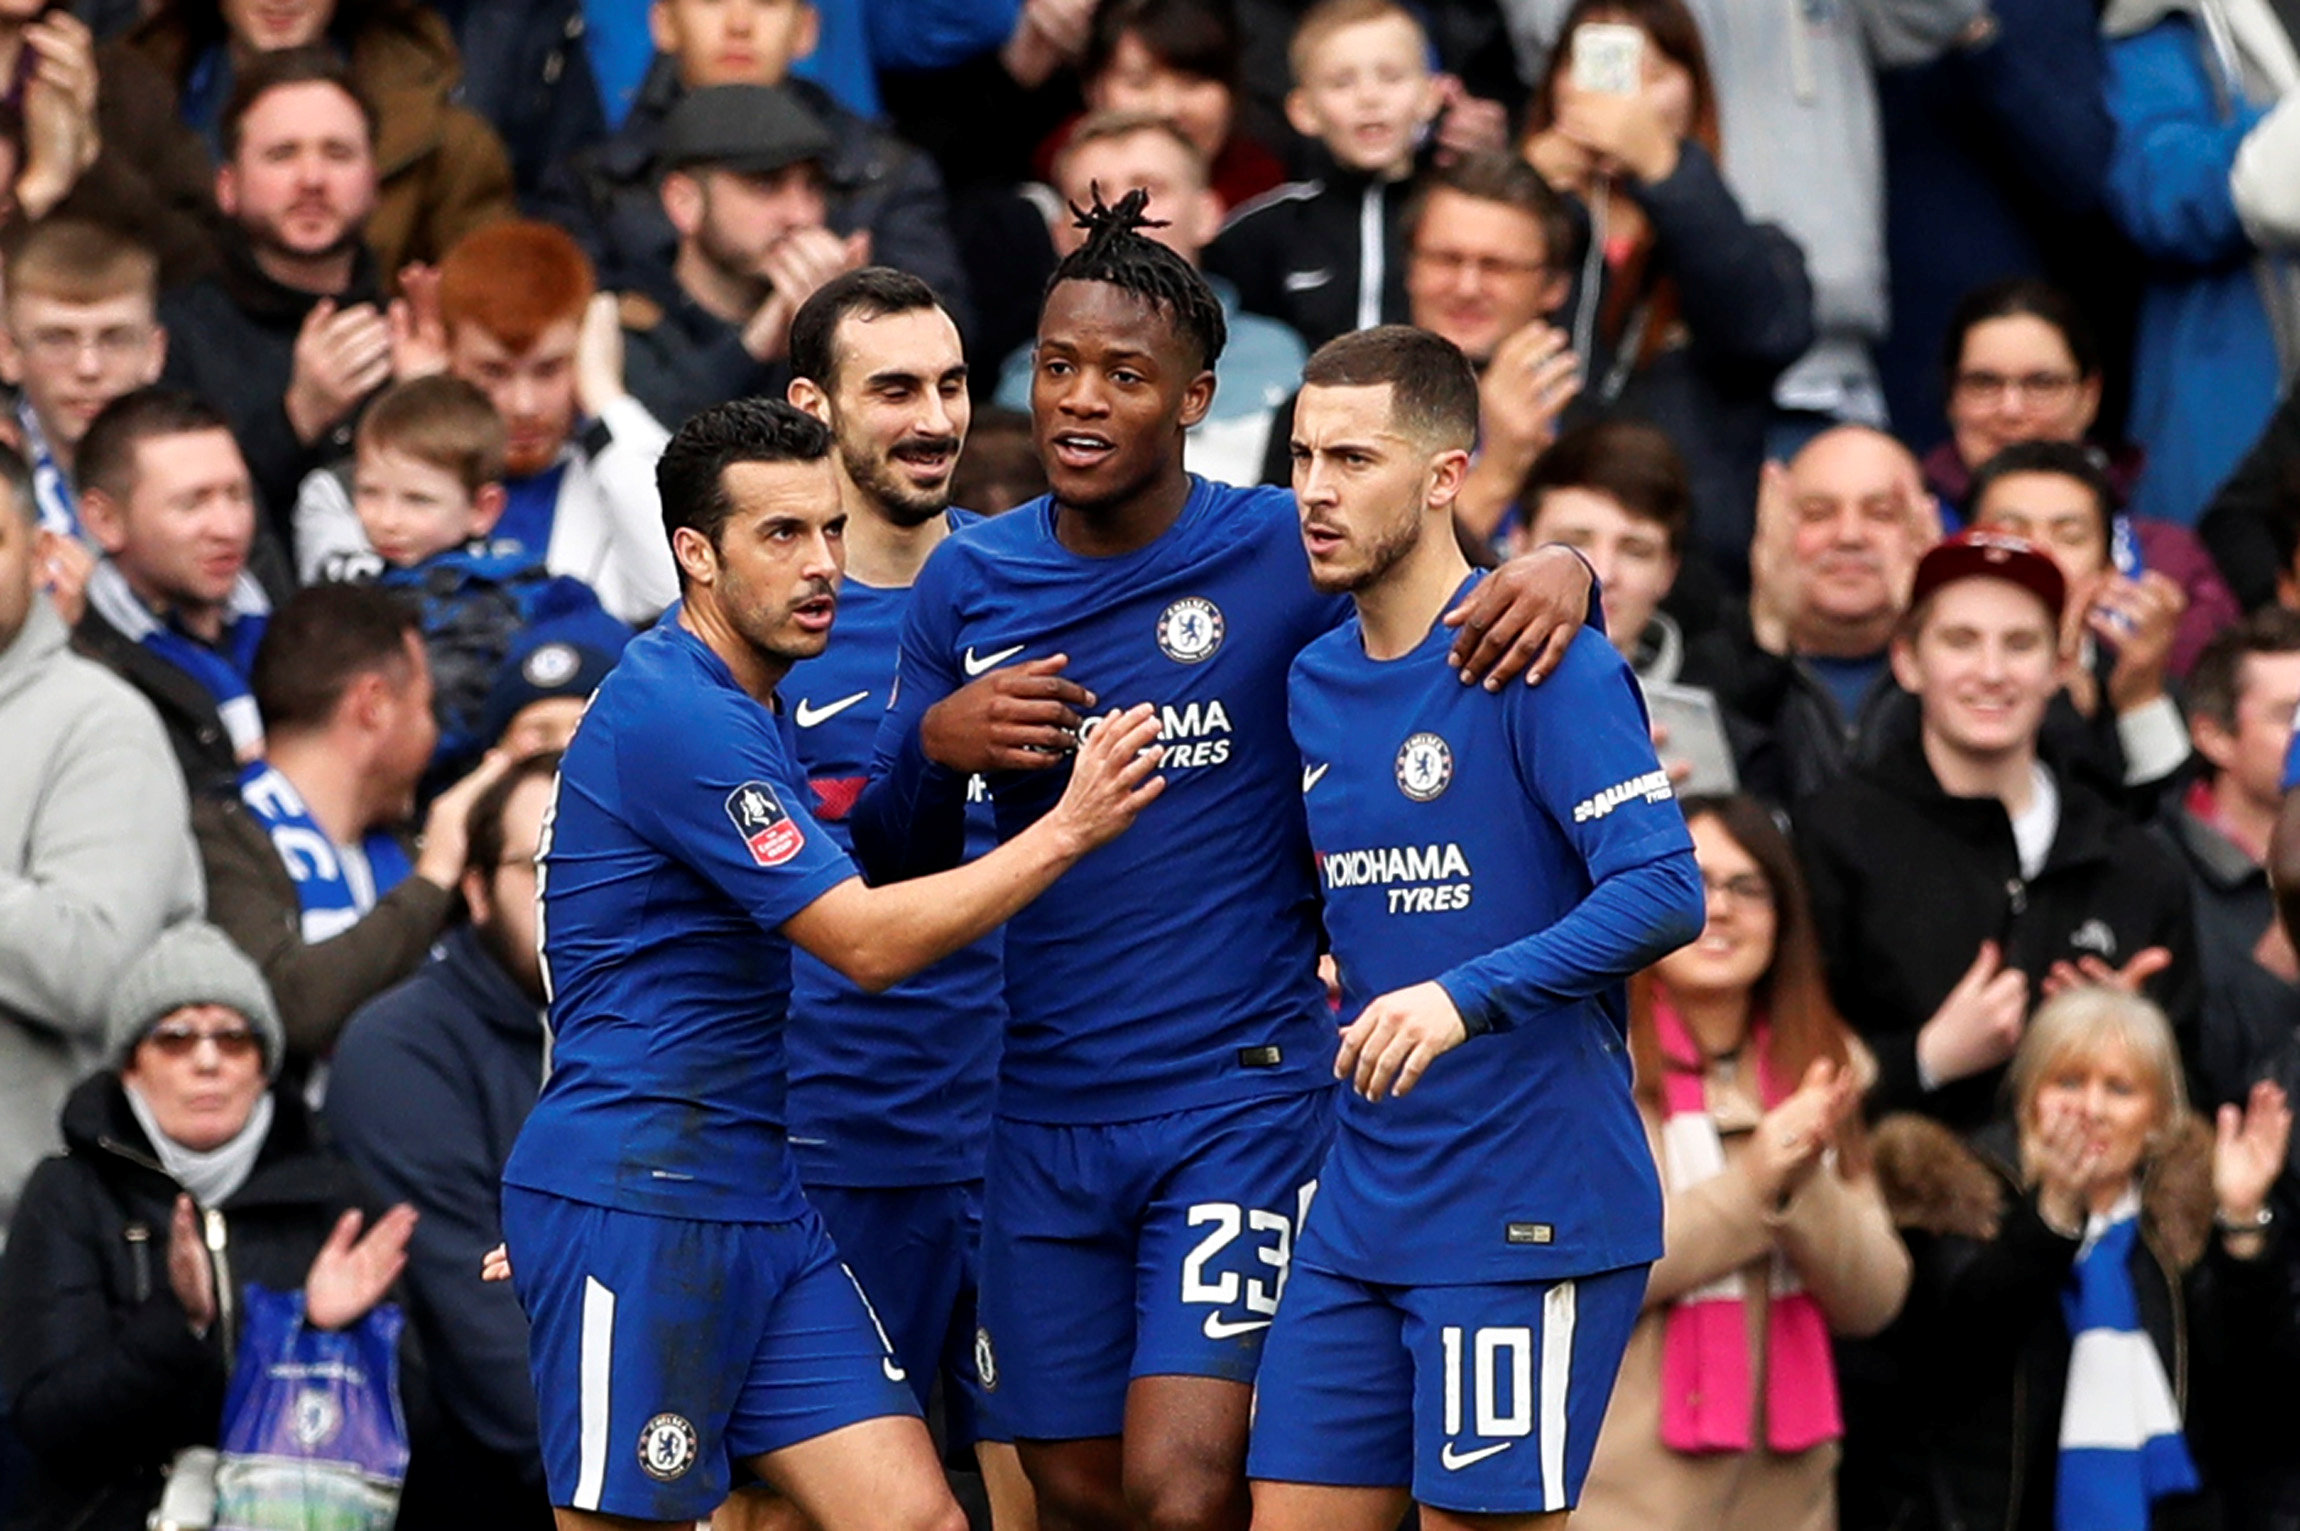 Chelsea's Michy Batshuayi celebrates scoring his team's second goal in FA Cup match against Newcastle United, on Sunday. January 28. Photo: Reuters/John Sibley